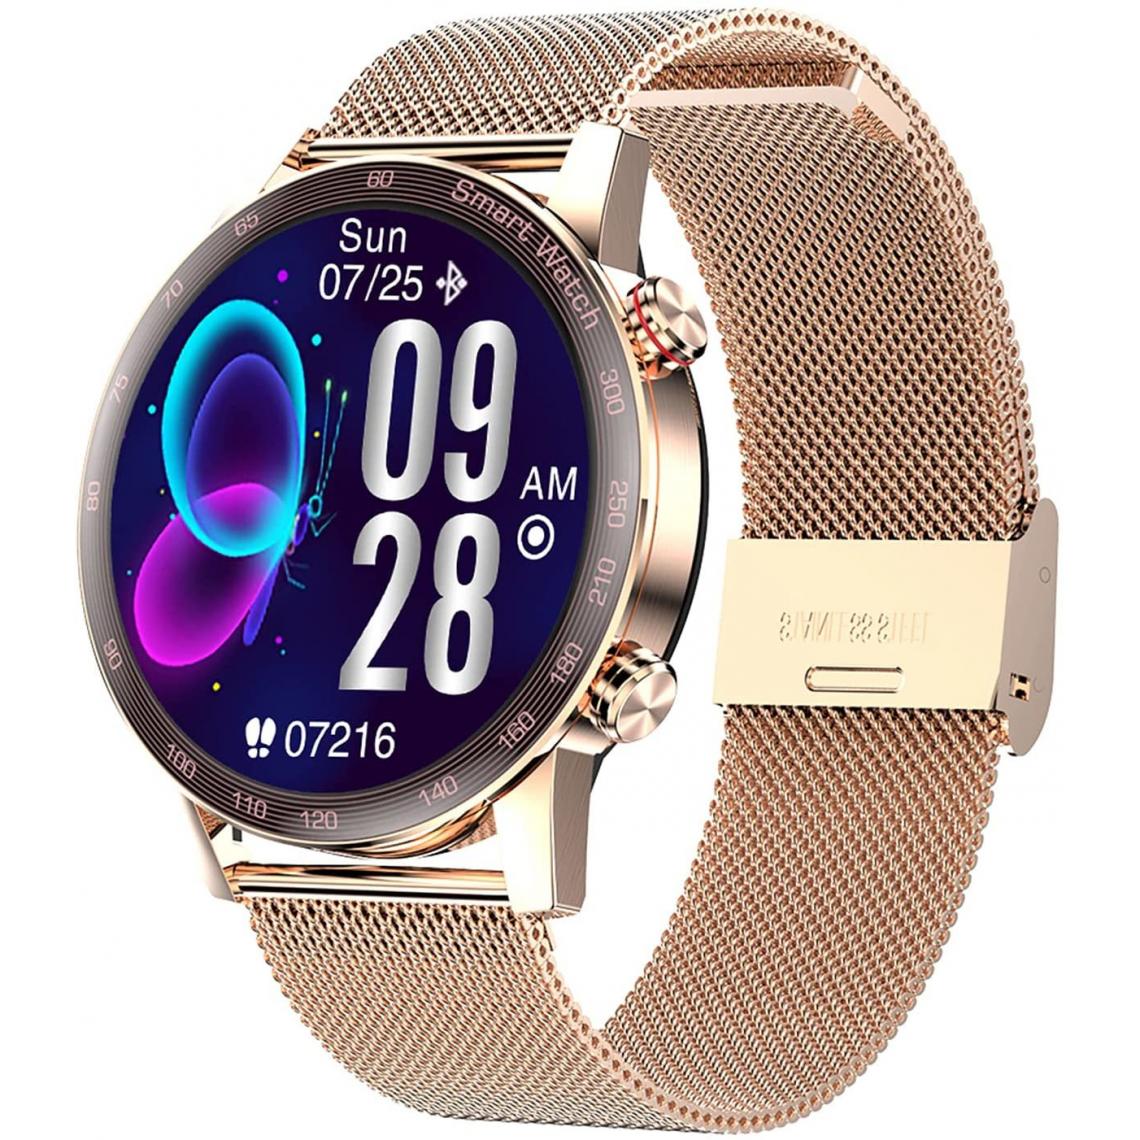 Chronotech Montres - Smartwatches for Android Phones iOS Smartwatch Fitness Tracker with Bluetooth Call with Heart Rate Monitor Blood Pressure Monitor Female Health, Sports Watch for Men and Women(gold) - Montre connectée